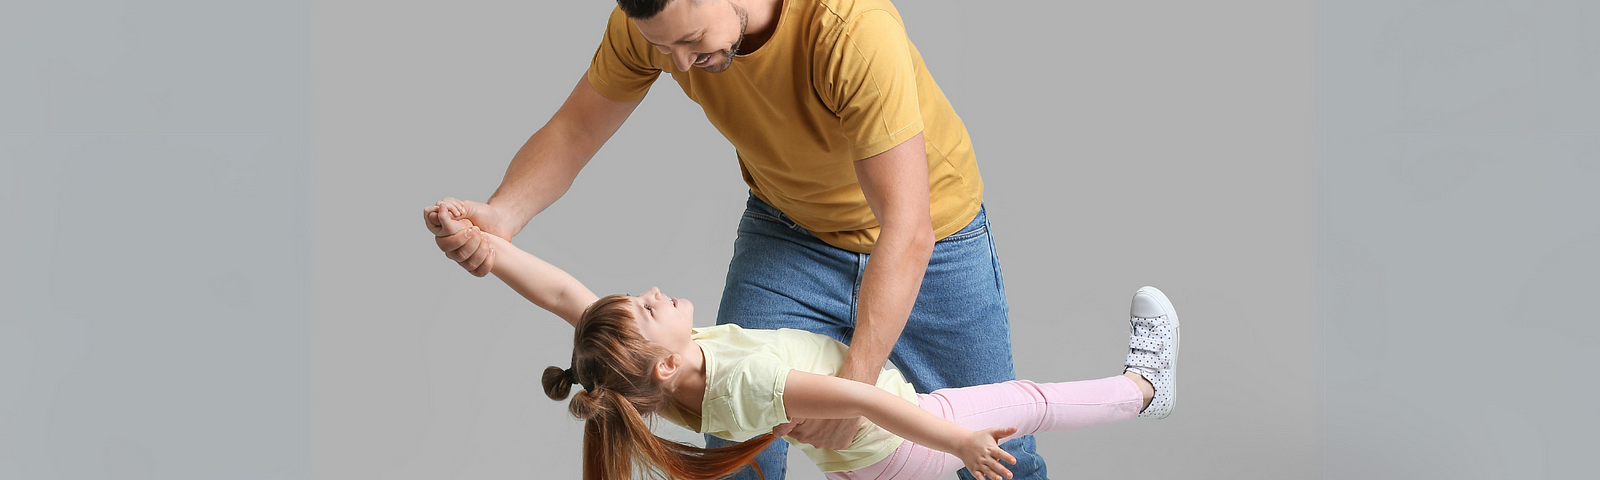 This image shows a man and a young girl in the midst of a playful dance or twirl. The man is bending slightly, holding the girl’s hand and arm as she leans back with her other arm extended, her foot kicking up behind her.